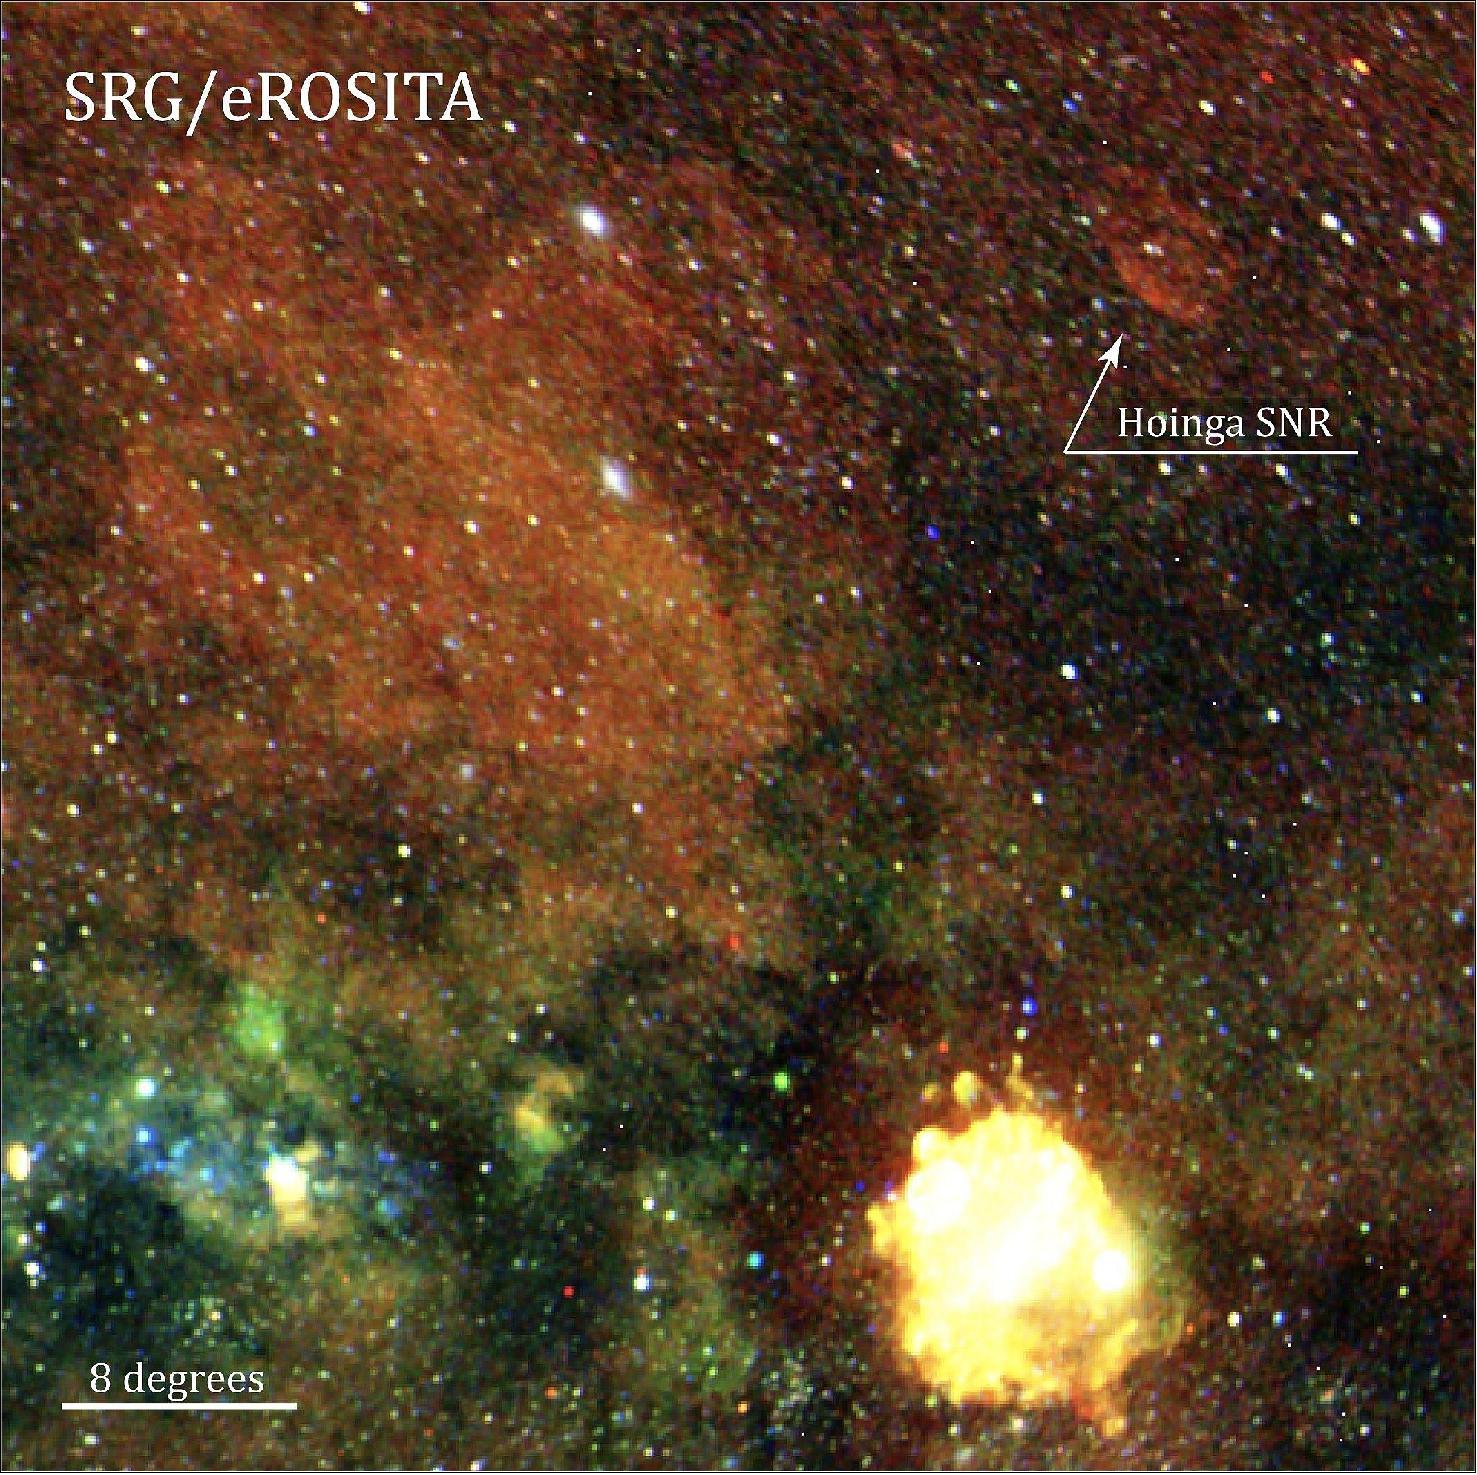 Figure 14: Cut-out of the first SRG/eROSITA all-sky survey. The Hoinga supernova remnant is marked. The large bright source in the lower quadrant of the image is from the supernova remnant ”Vela” with ”Pupis-A”. The image colors are correlated with the energies of the detected X-ray photons. Red represents the 0.3-0.6 keV energy range, green 0.6-1.0 keV and blue 1.0-2.3 keV (image credit: SRG/eROSITA)